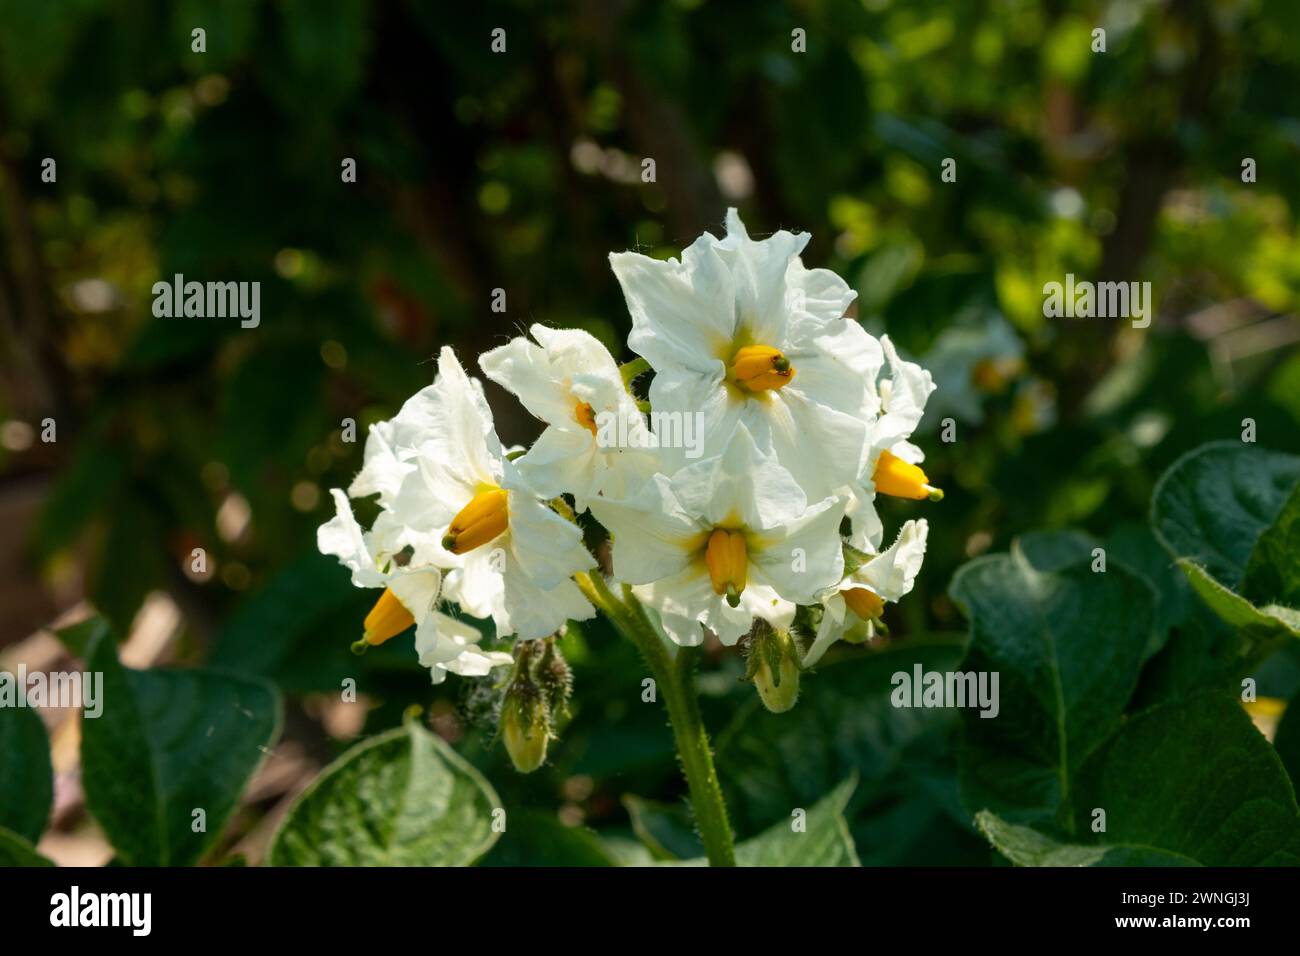 The white petals and yellow stamens of flowers of the British Queen variety of potato. Summer, England, UK Stock Photo